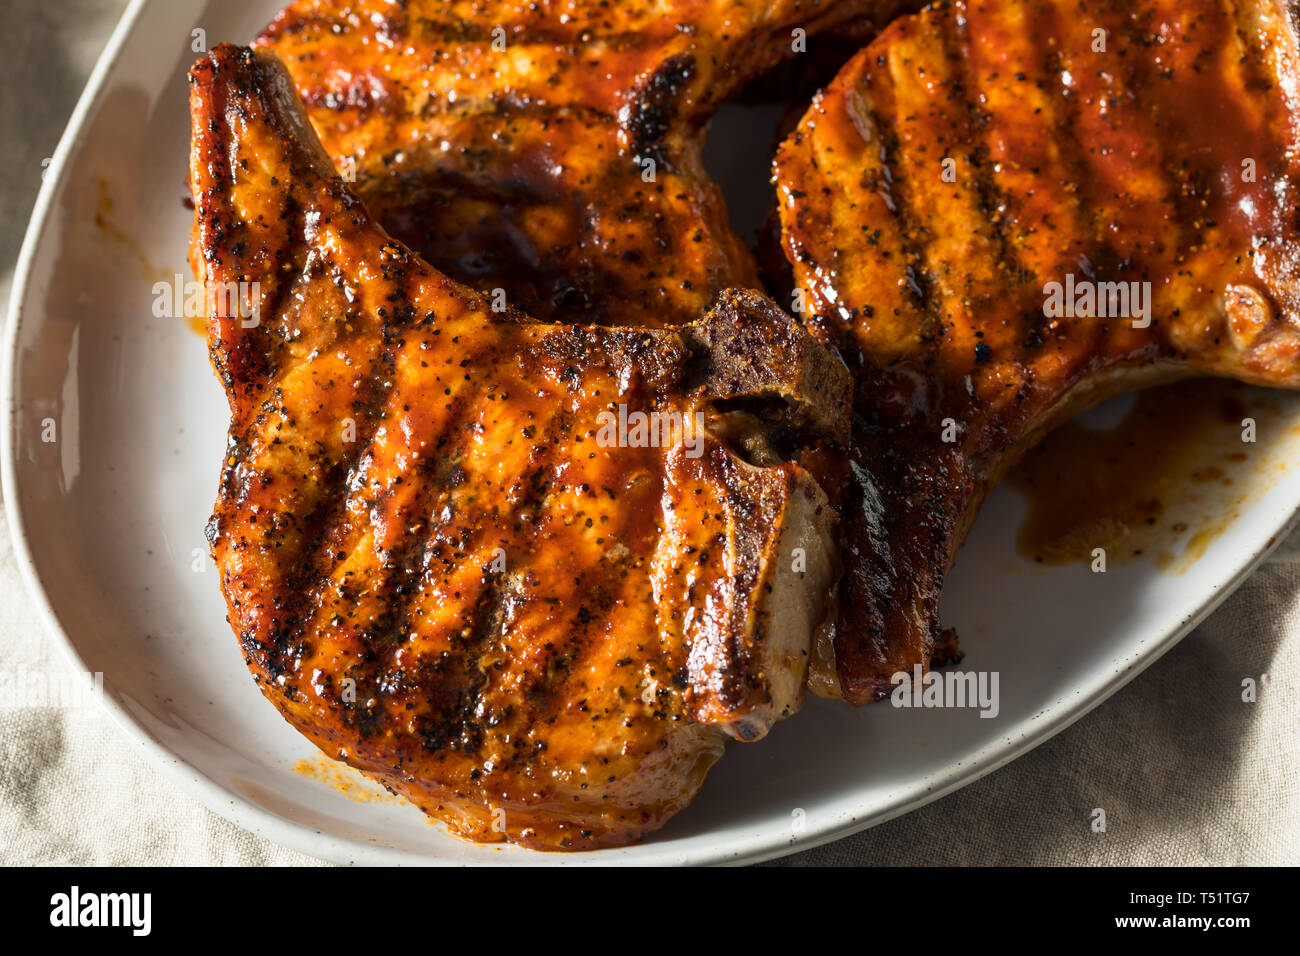 Homemade Barbecue Pork Chops Ready to Eat Stock Photo